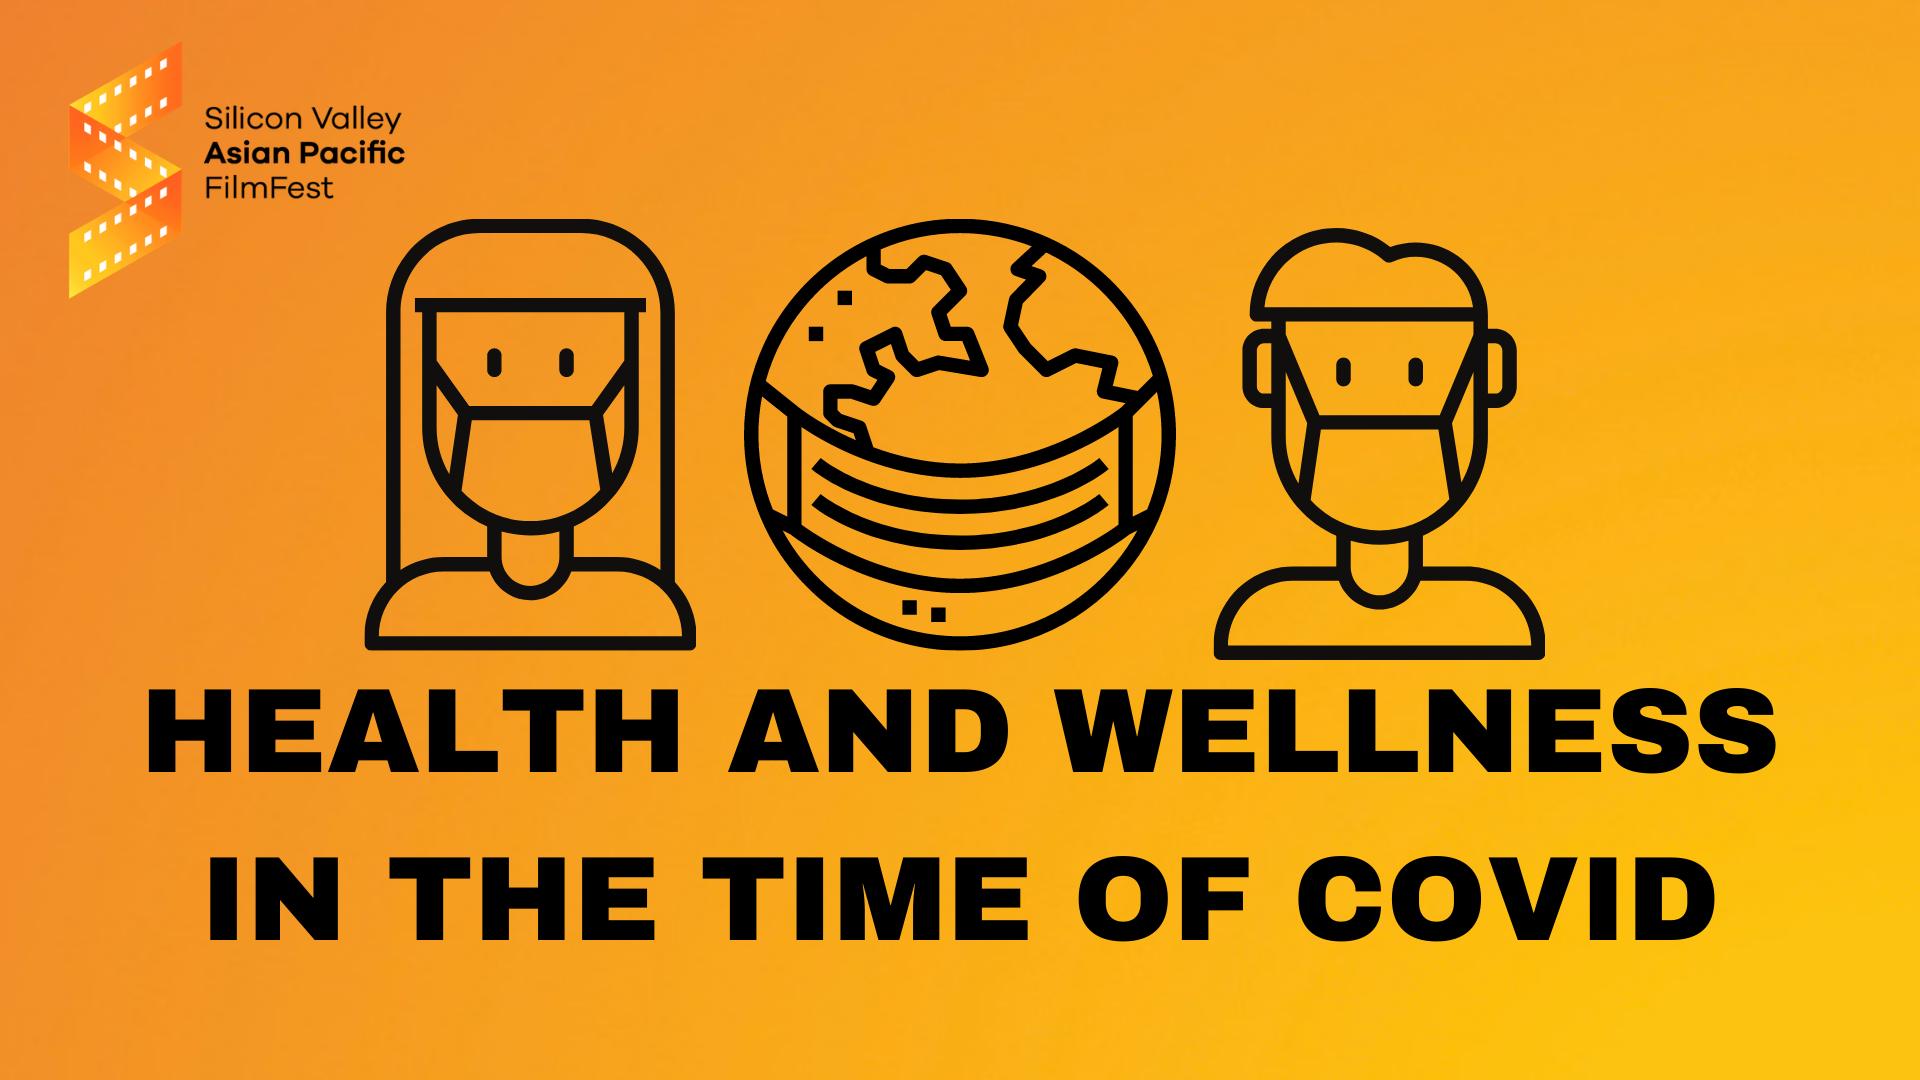 Panel B - Health & Wellness in the Time of Covid